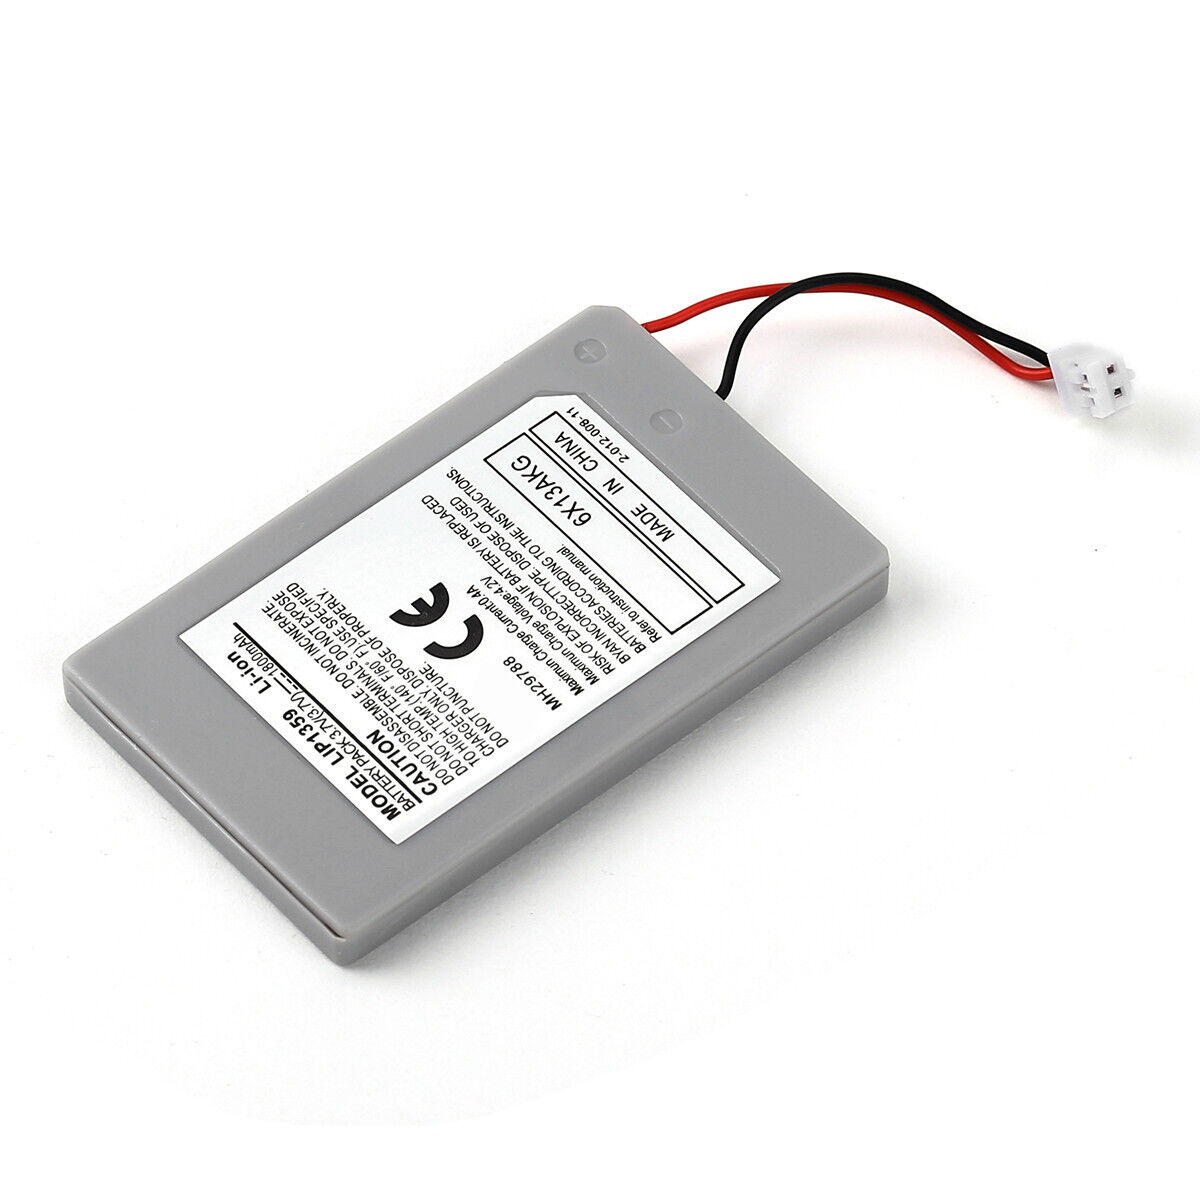 New 1800mAh Rechargeable Battery For Sony Playstation 3 PS3 Wireless Controller Unbranded - фотография #8